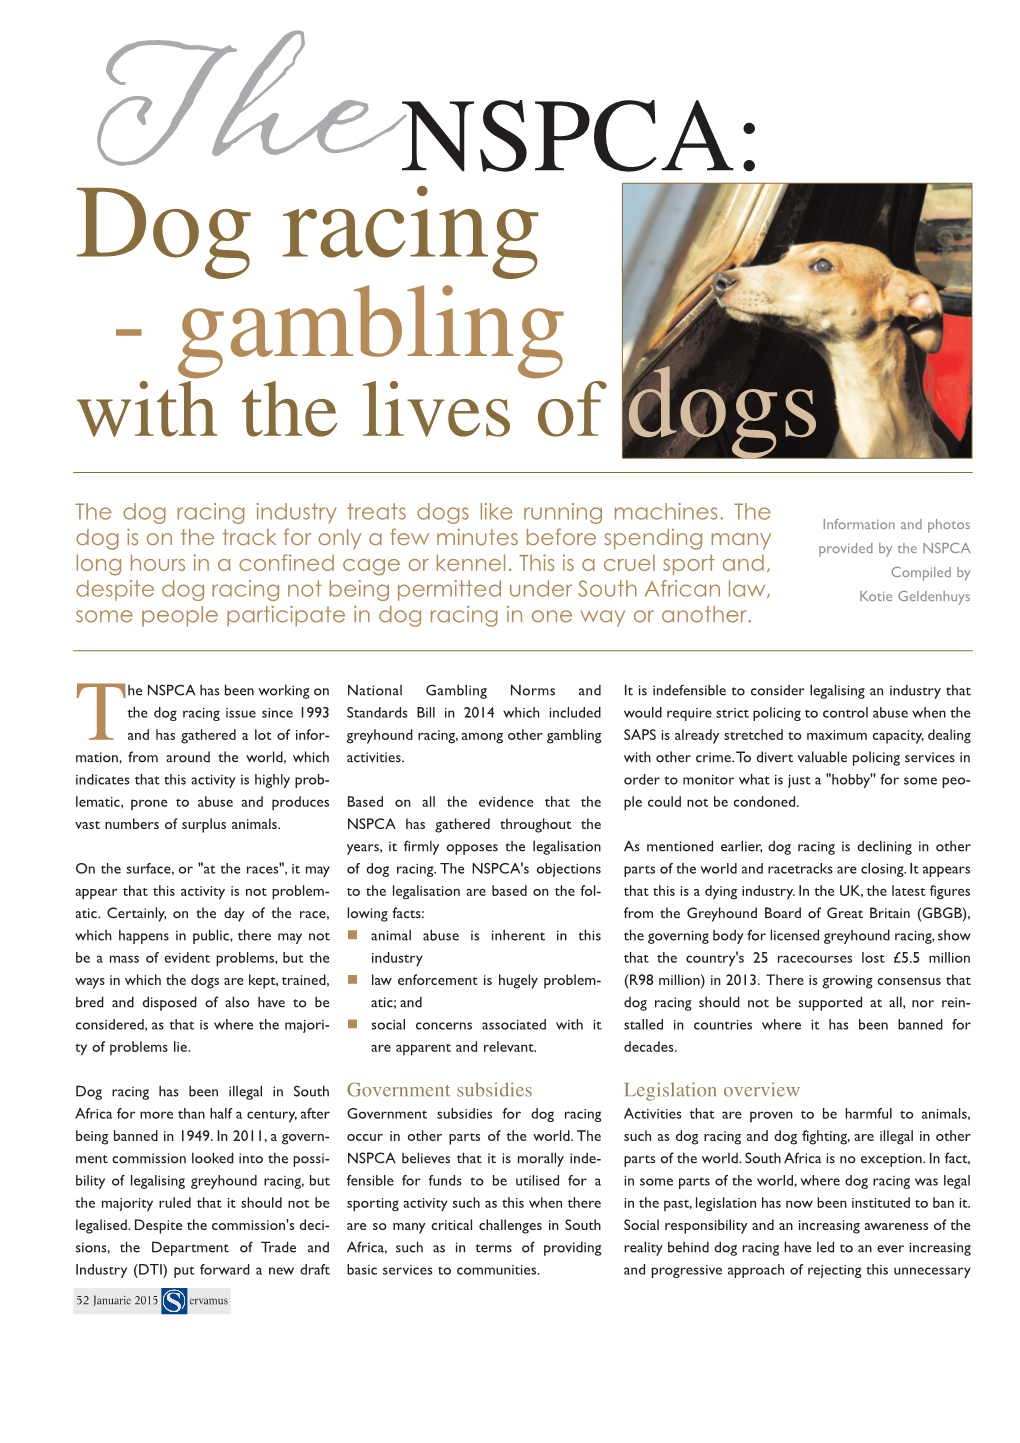 Dog Racing - Gambling with the Lives of Dogs